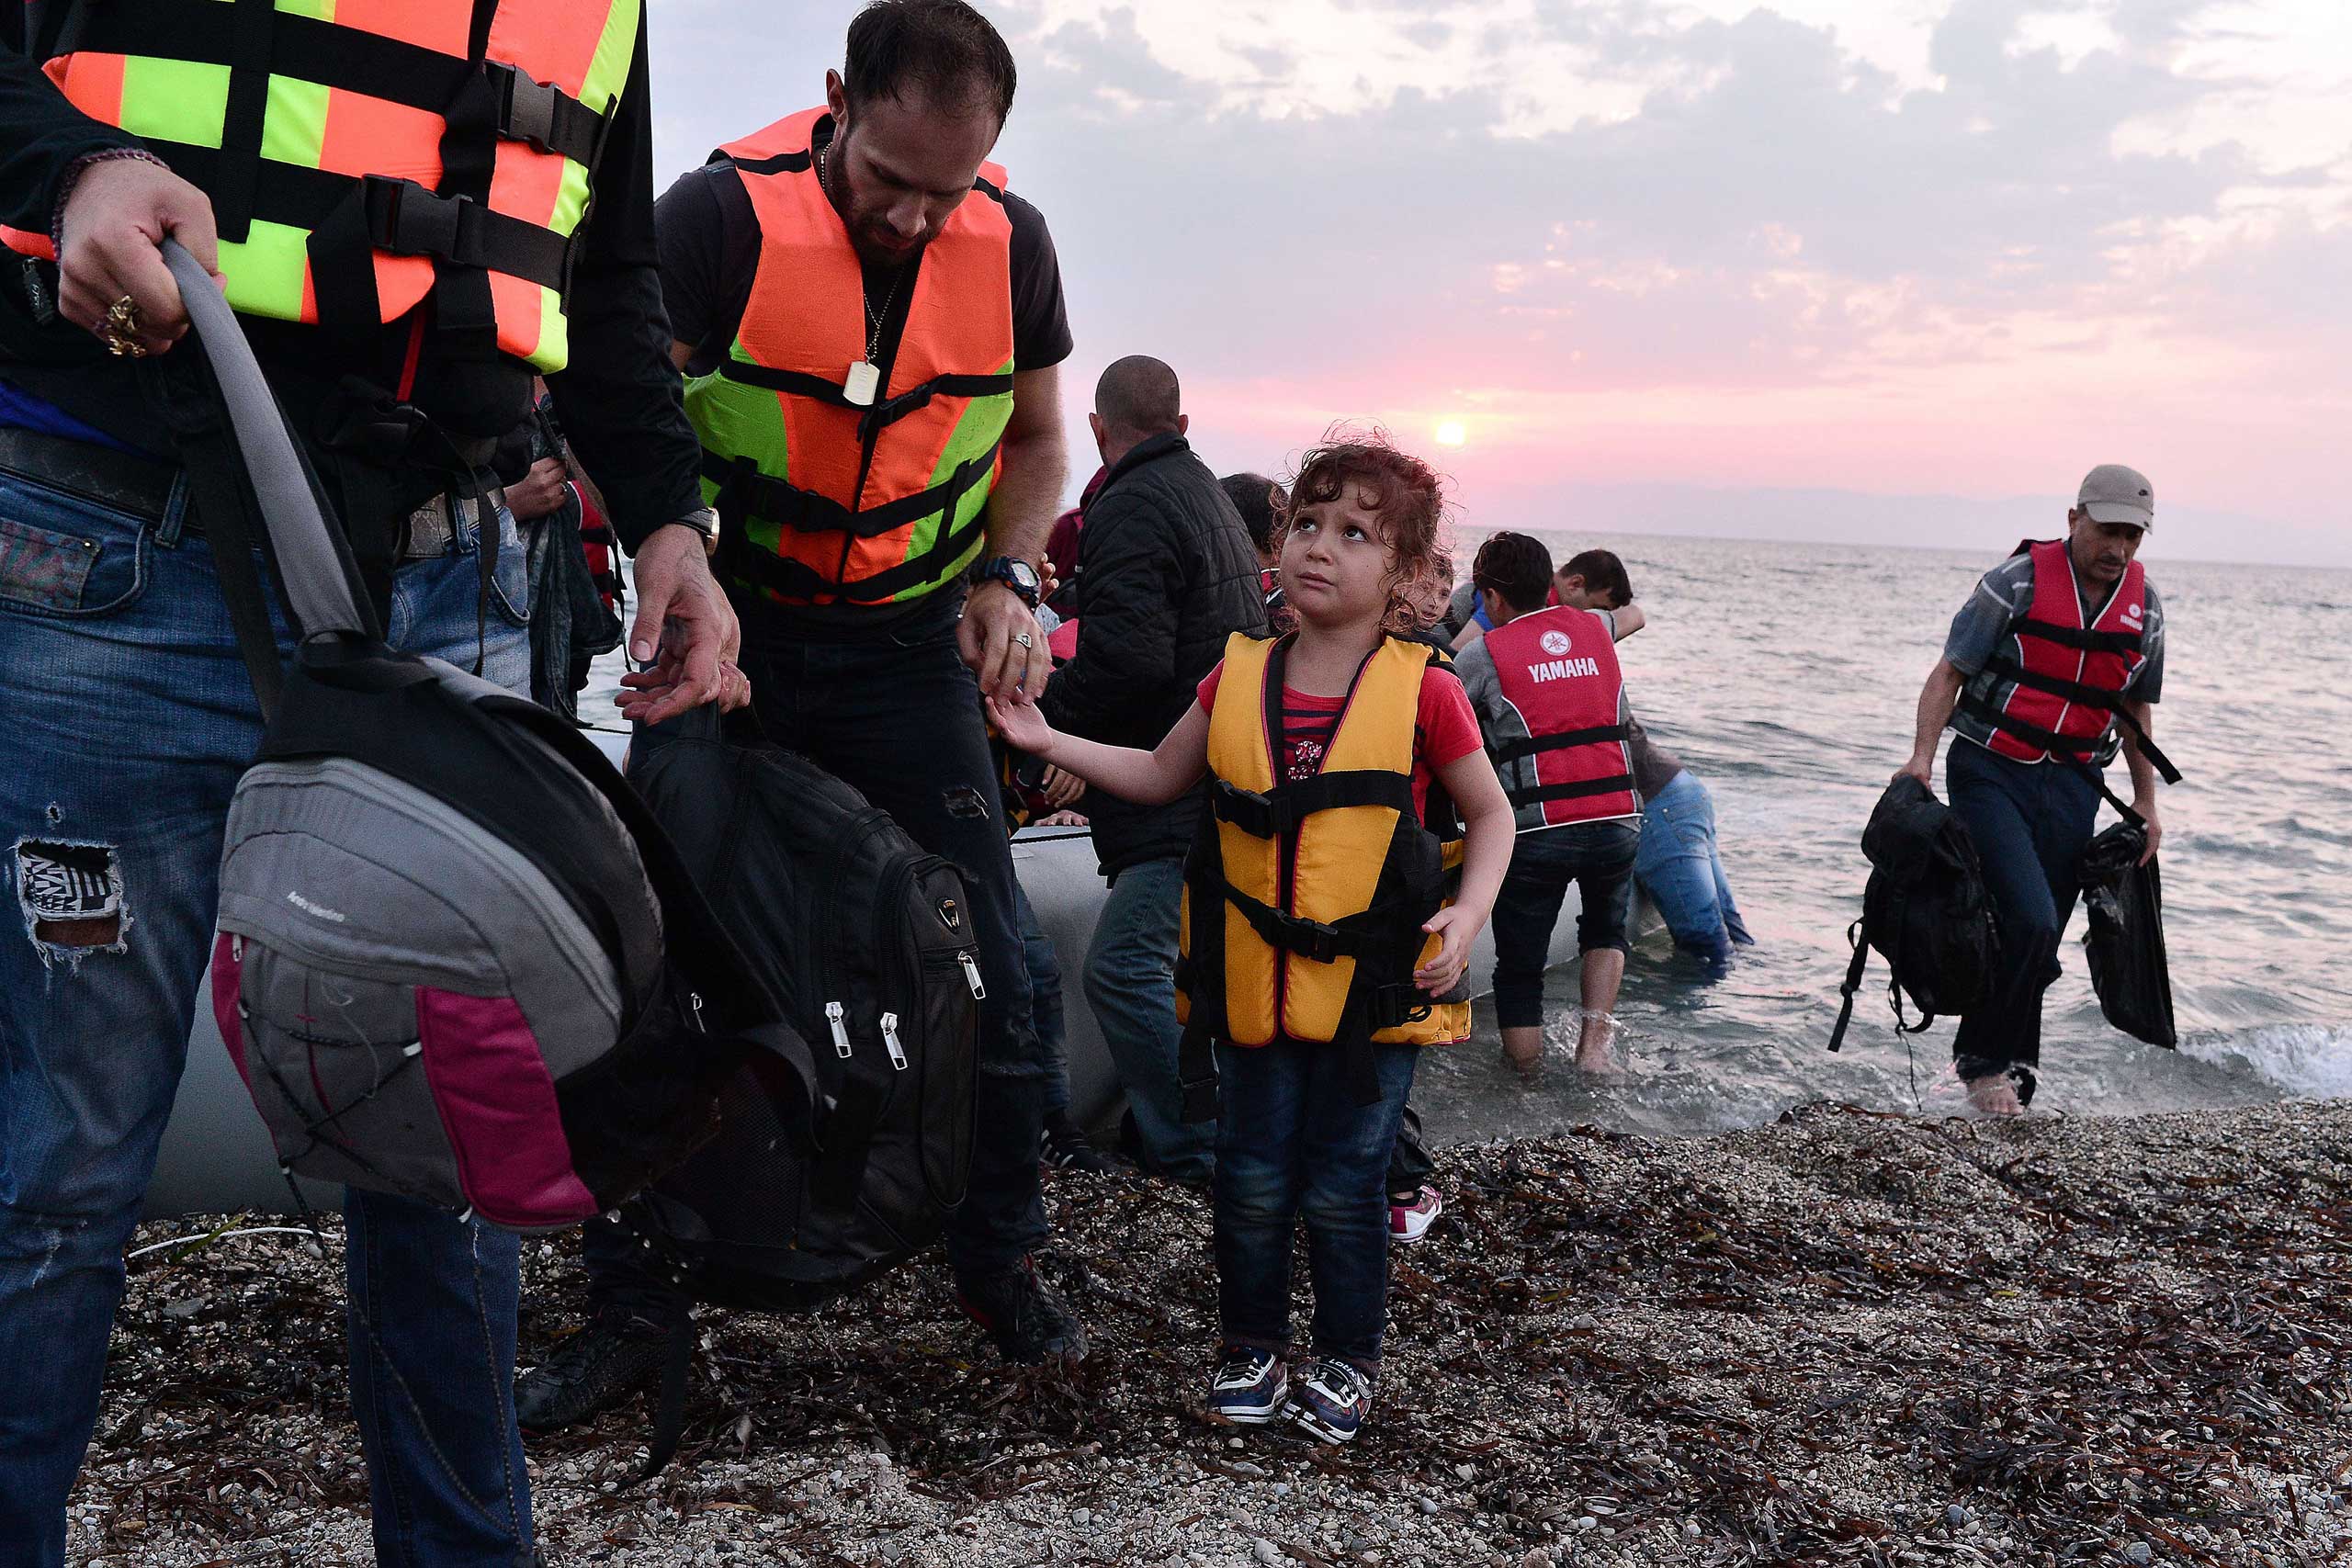 Syrians disembark on the island of Lesbos, Greece, early on June 18, 2015. (Louisa Gouliamaki—AFP/Getty Images)